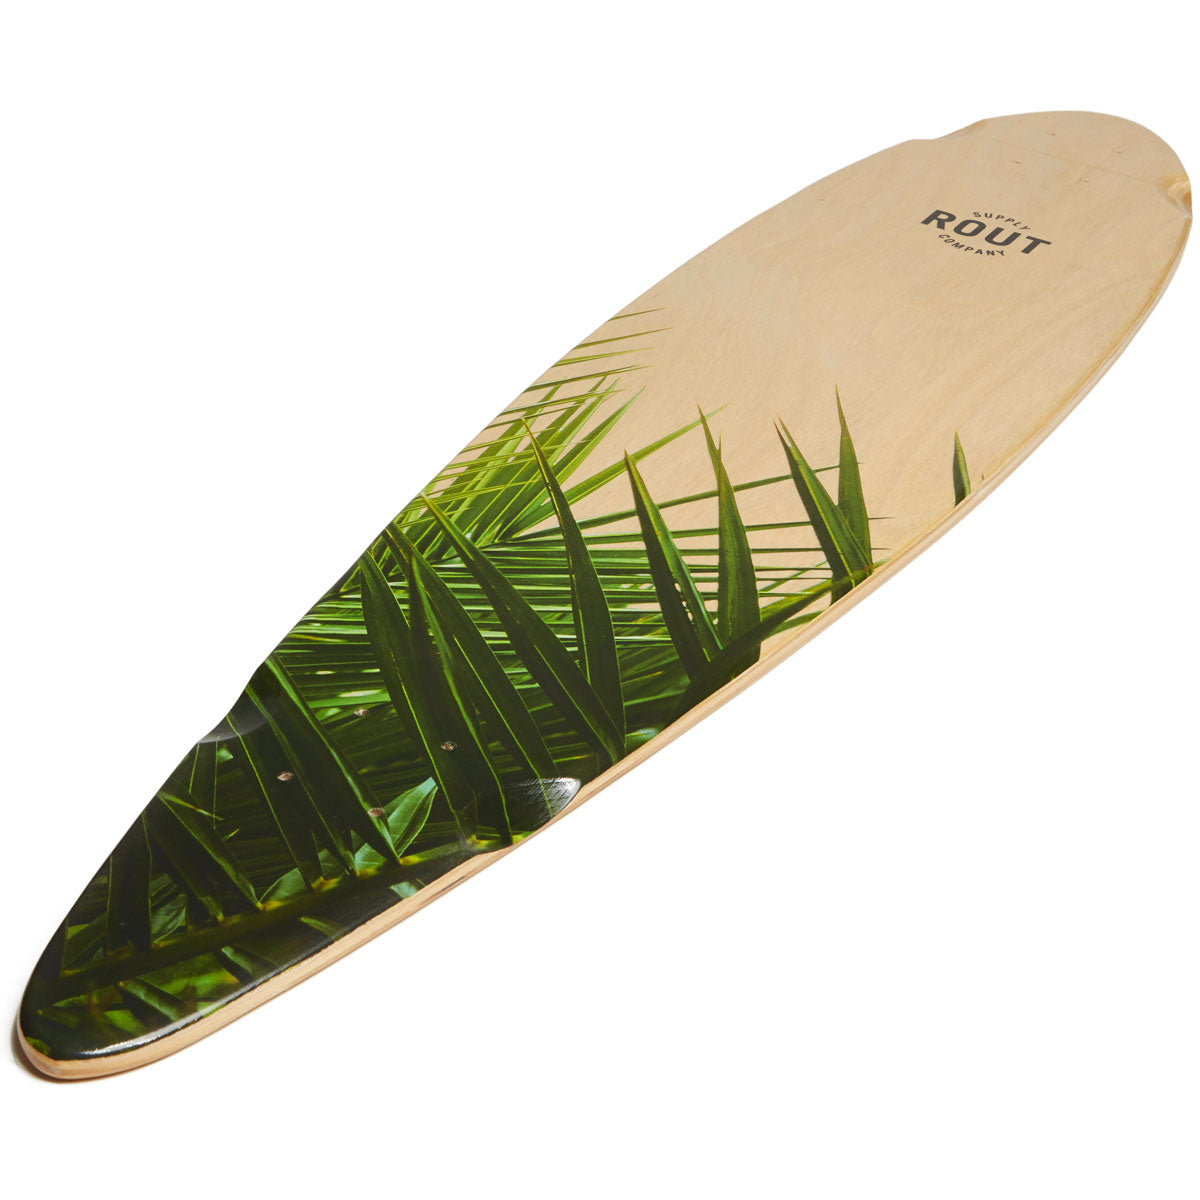 Rout Palms Pintail Longboard Deck image 4